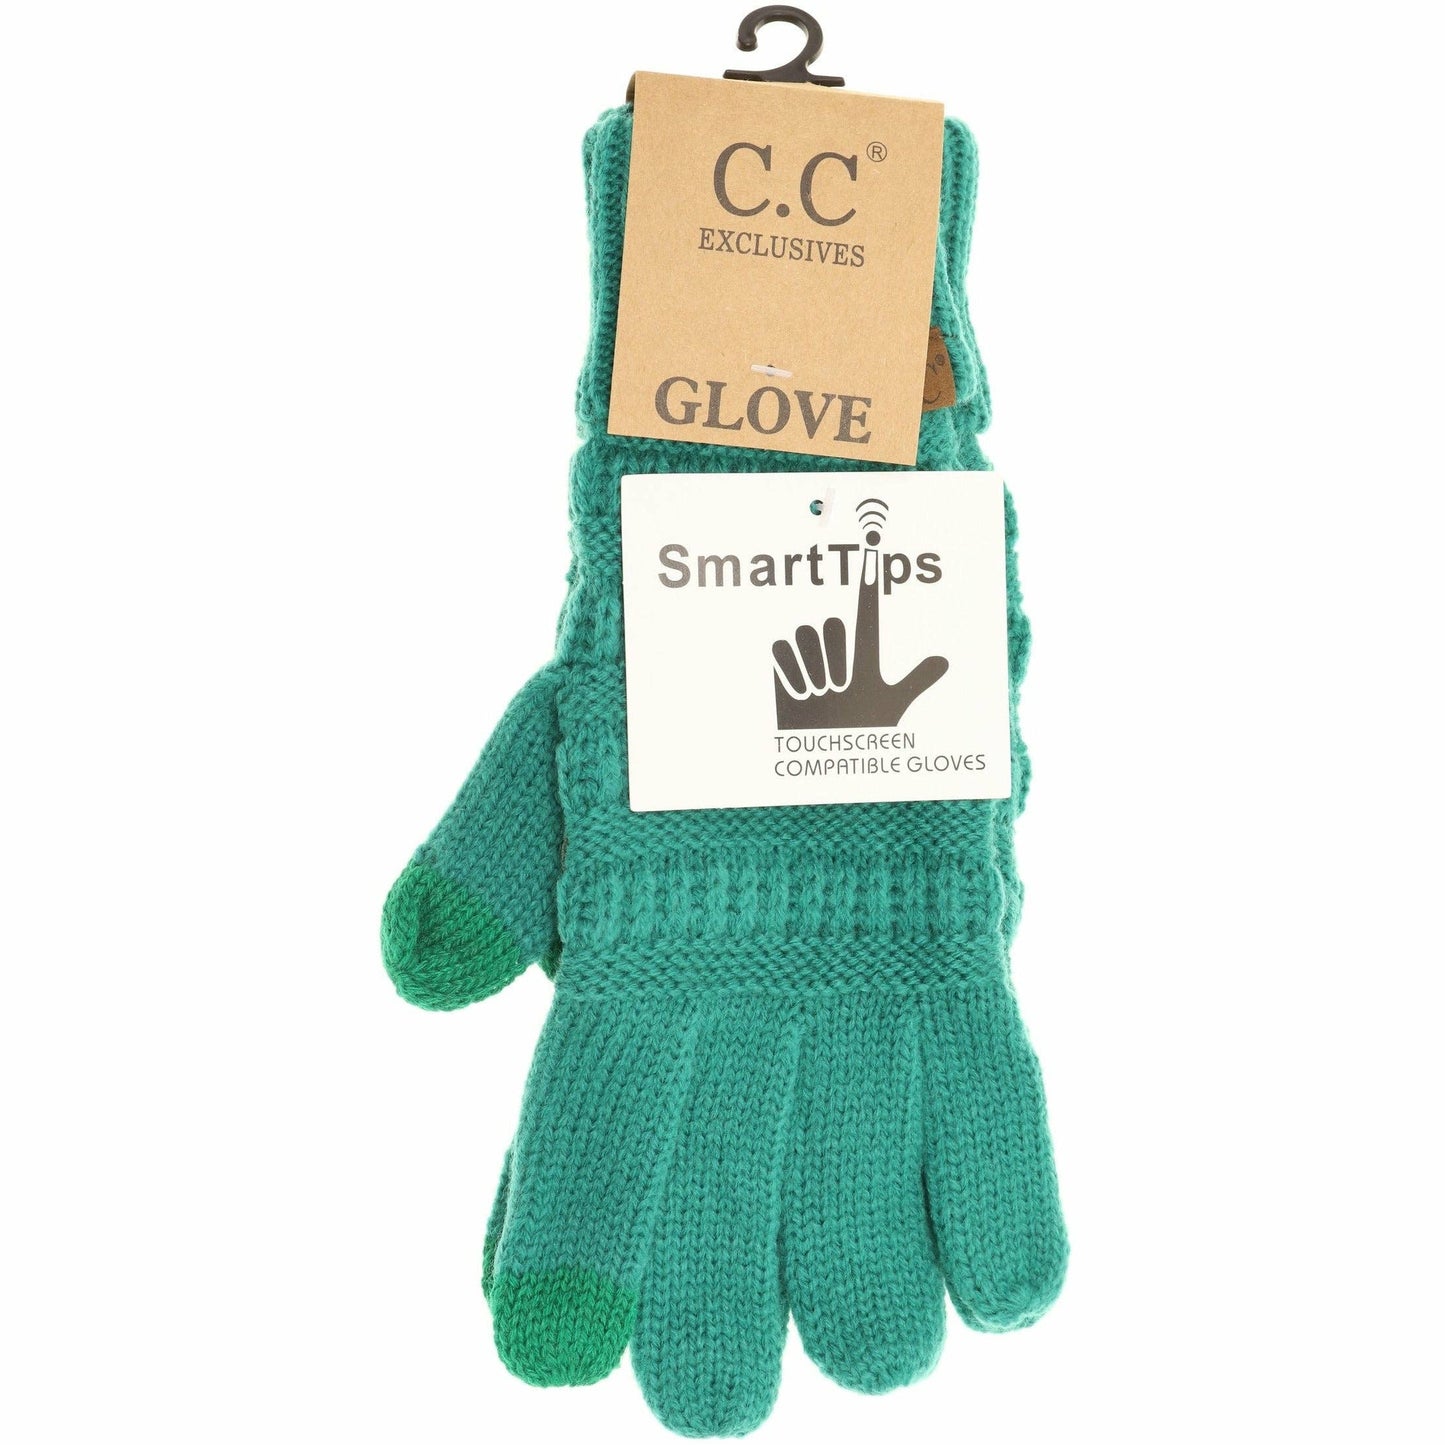 Solid Cable Knit CC Gloves : New Olive